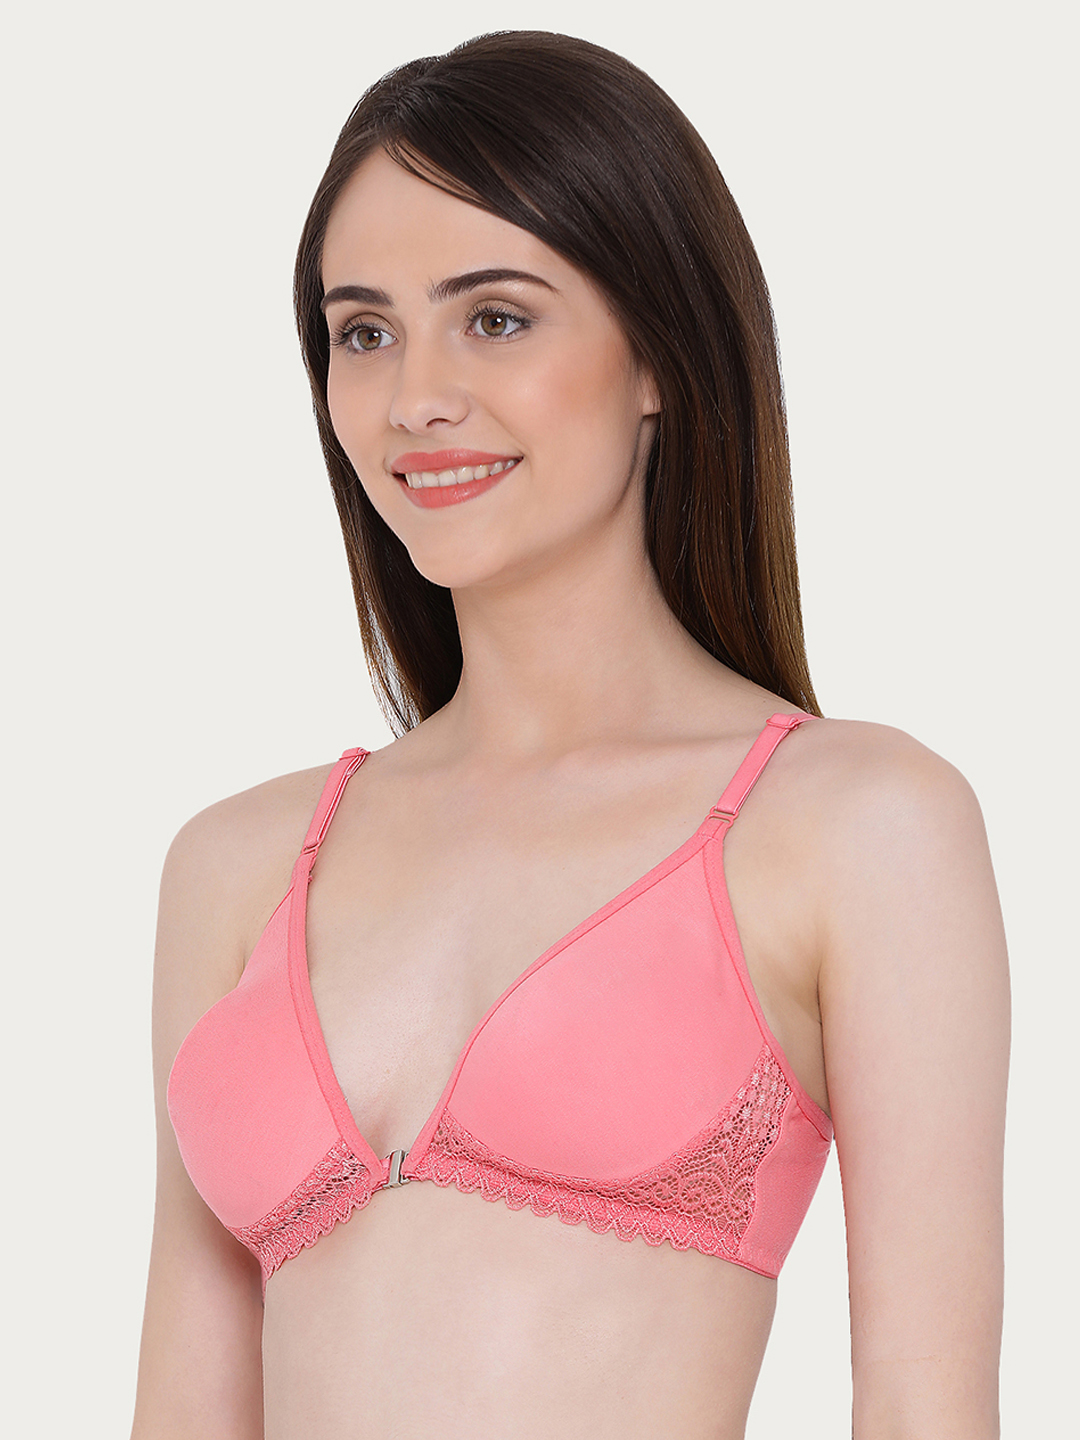 Clovia Pink Solid Non-Wired Non Padded Plunge Bra - Night Dress